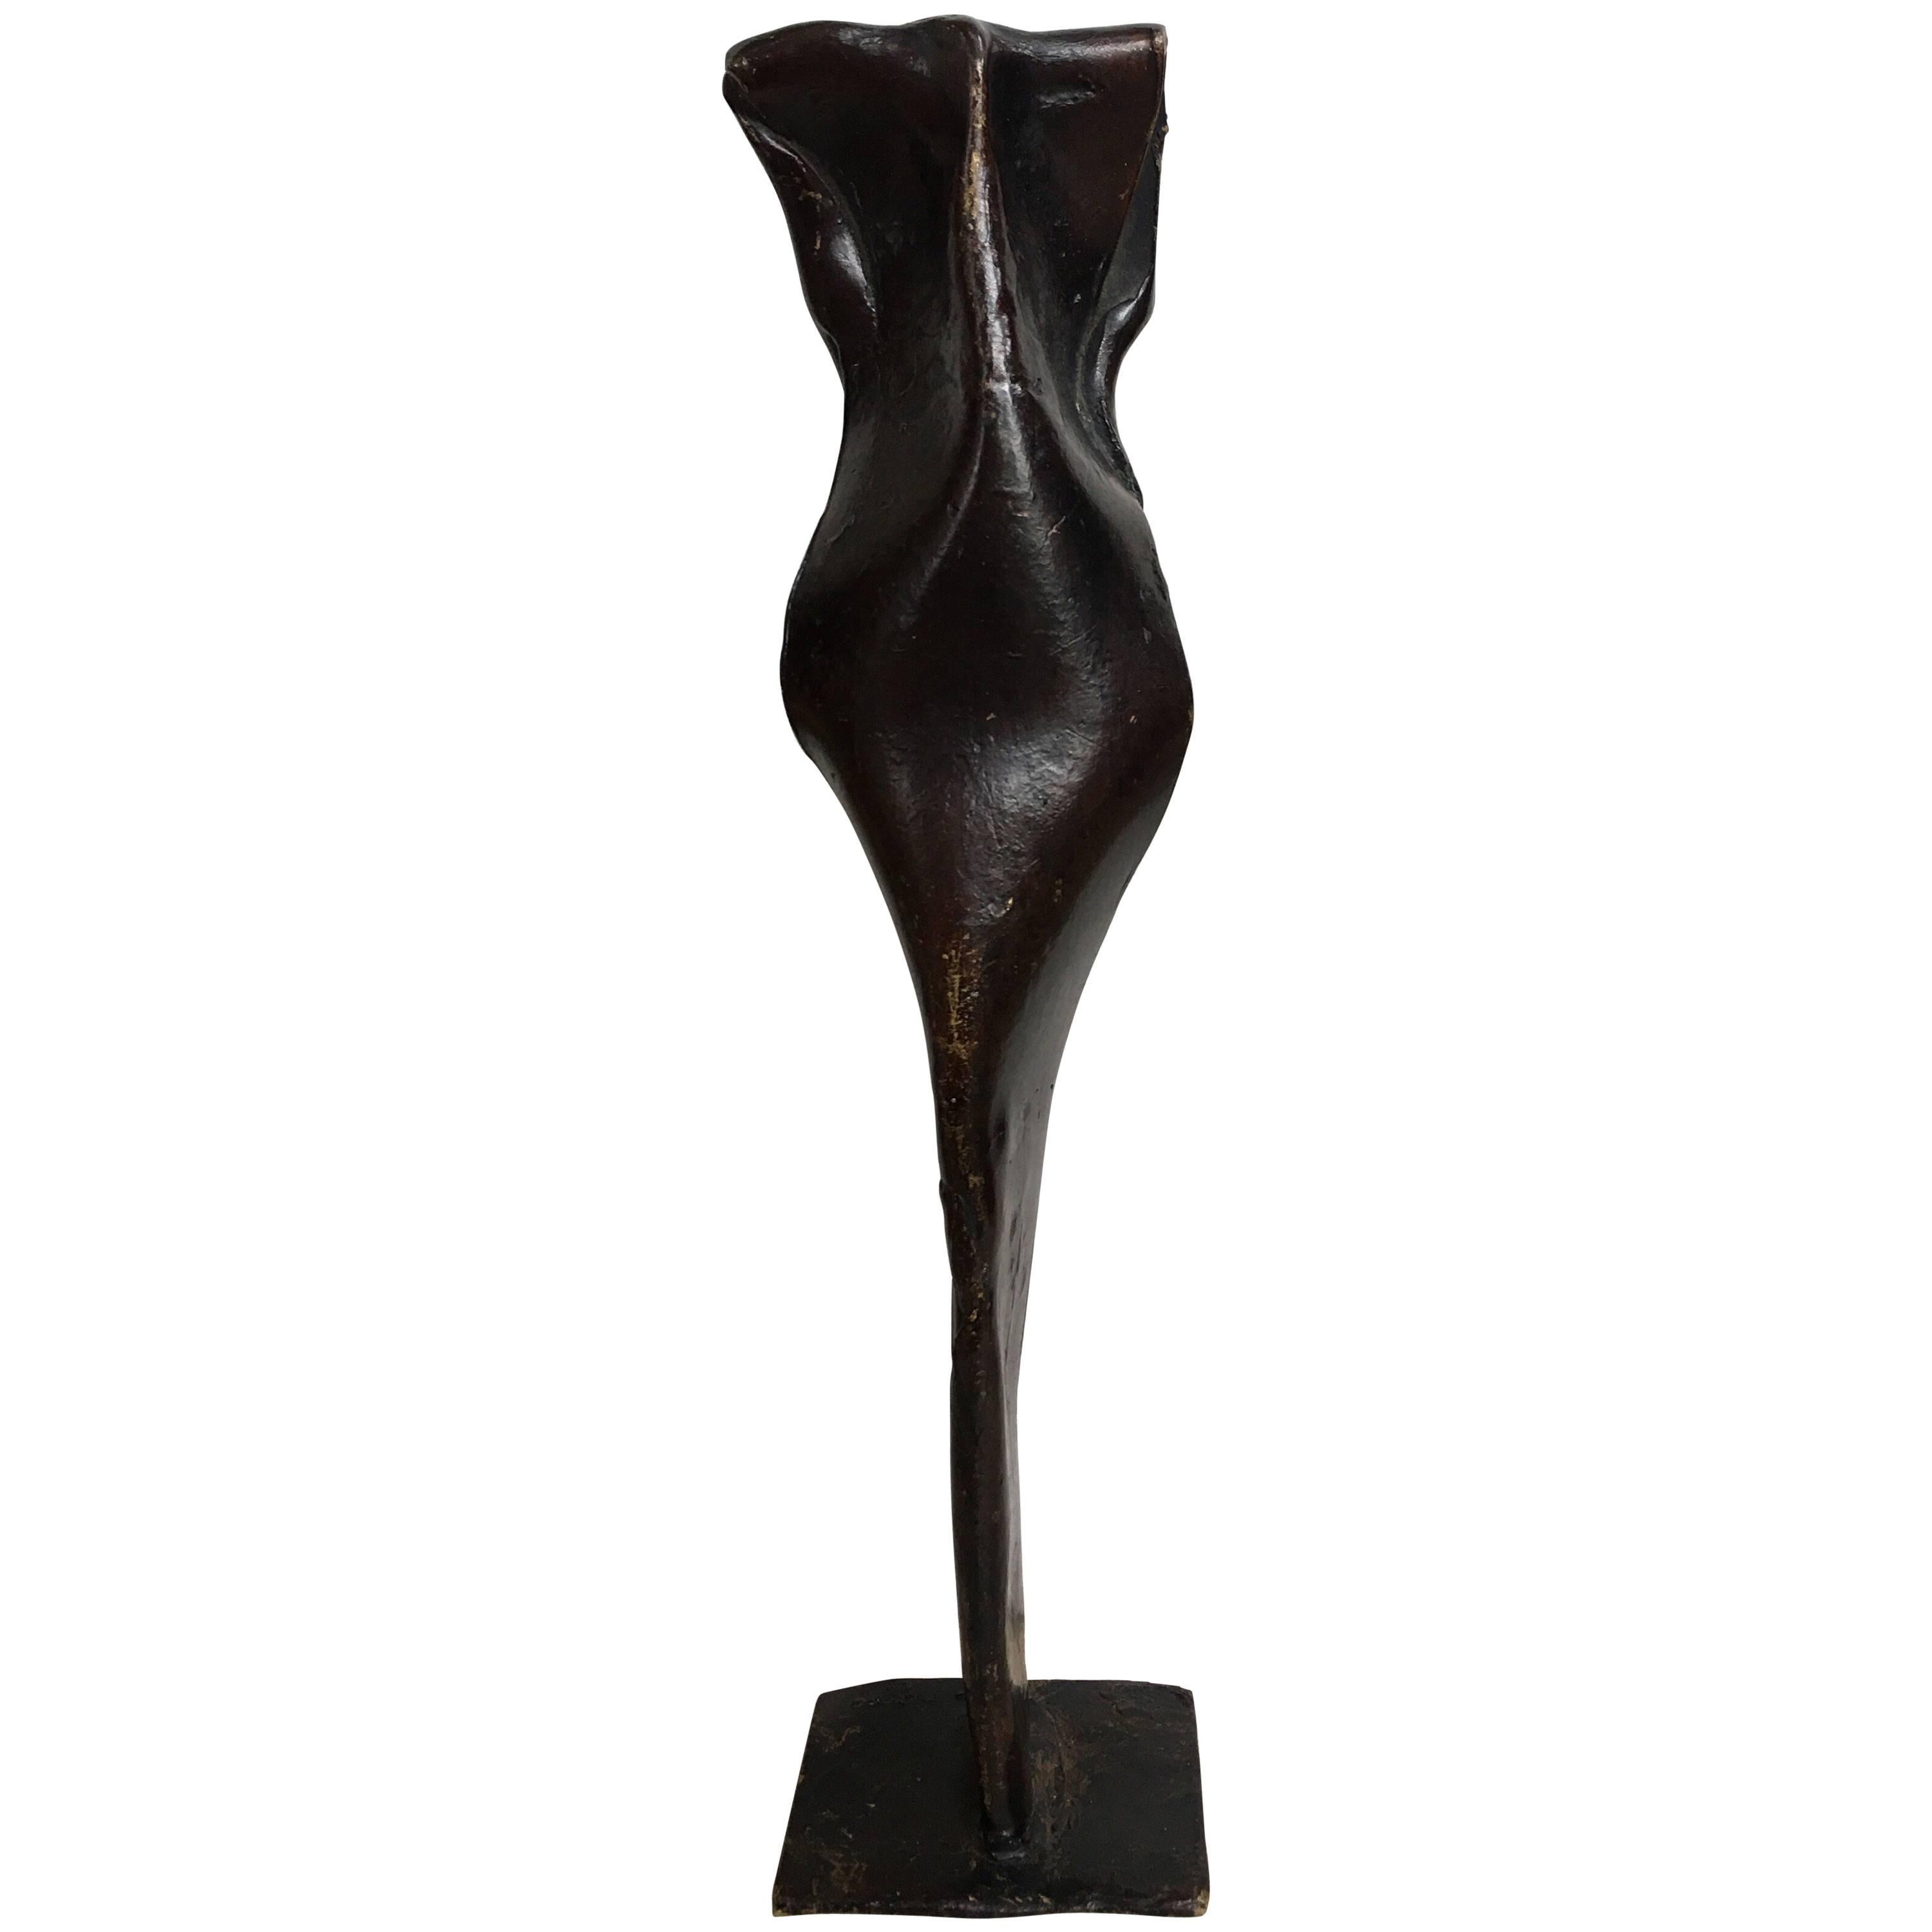 Guitou Knoop Mid-Century Modern Abstract Brutalist Sculpture, France For Sale